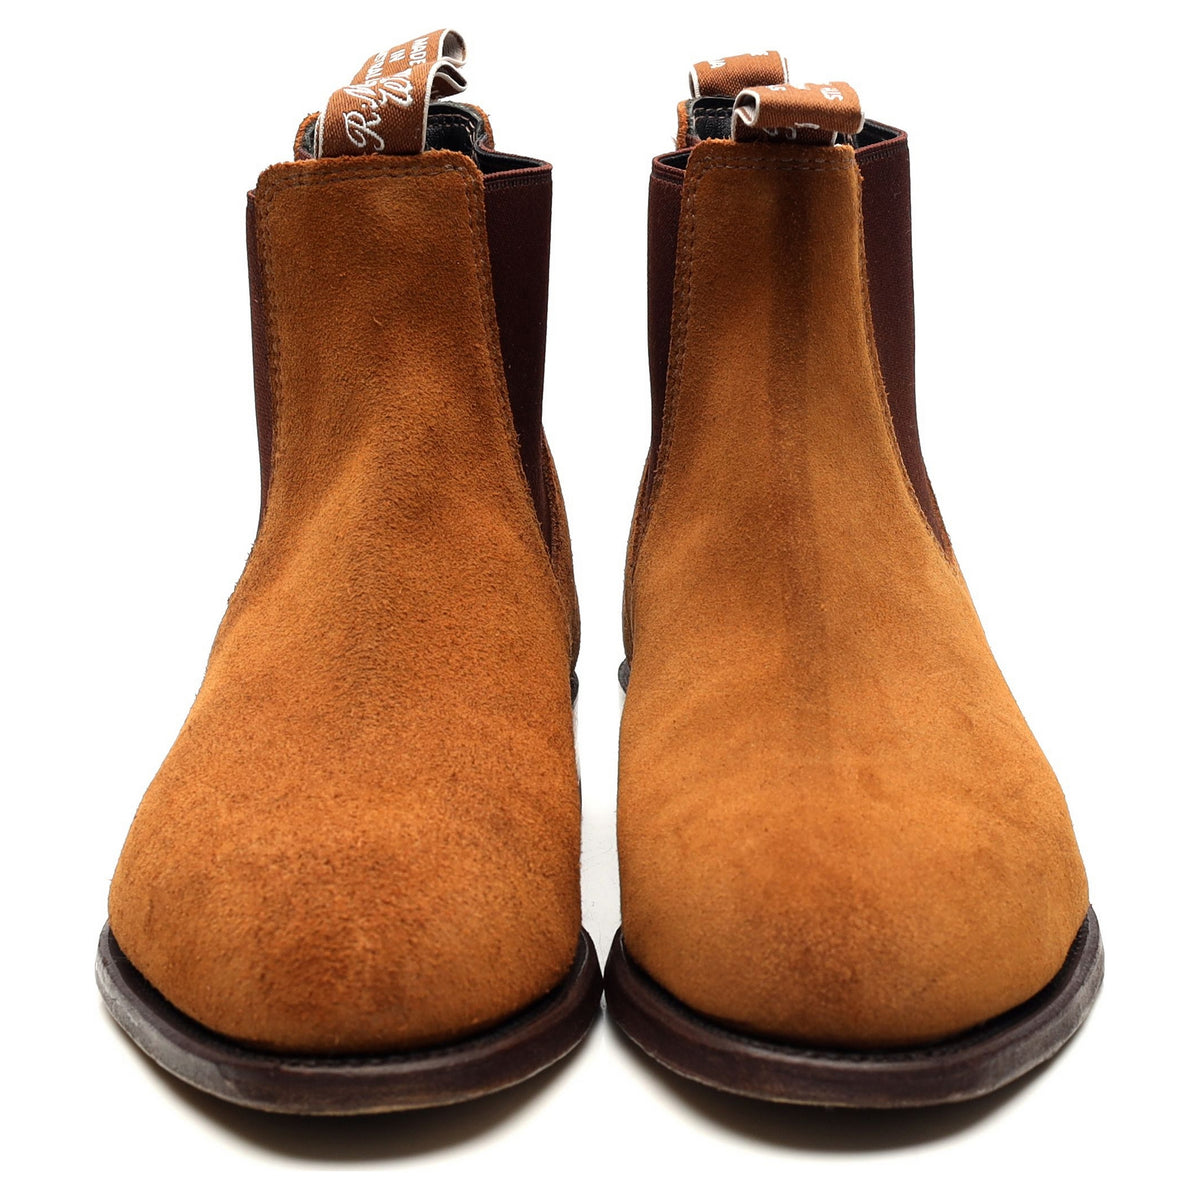 Tan Brown Suede Chelsea Boots UK 6 G